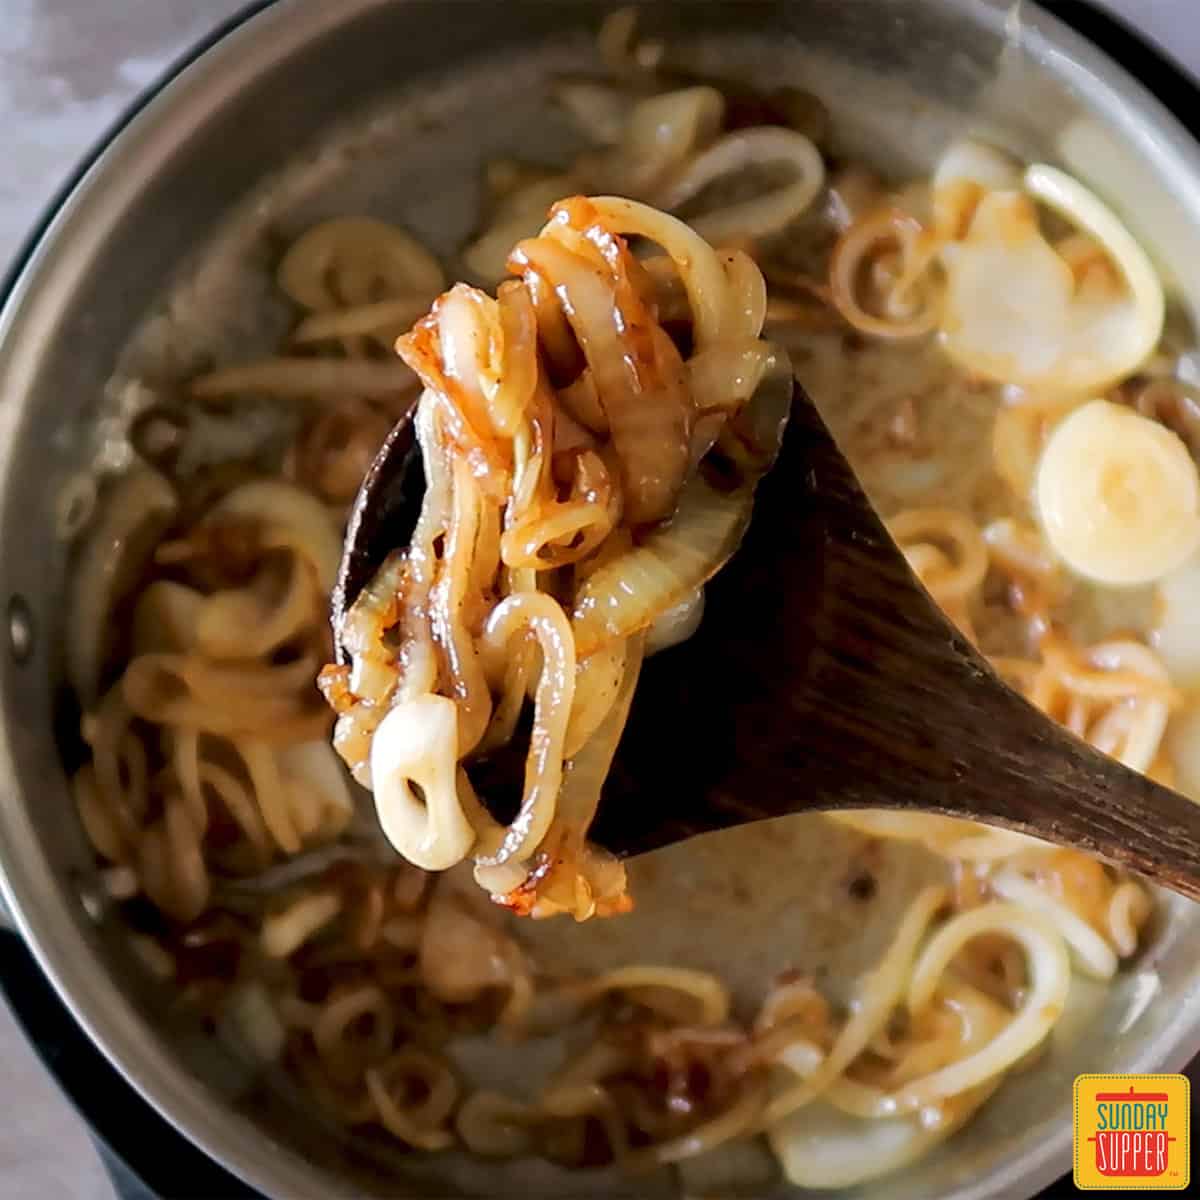 caramelized onions on a wooden spoon over top a pan of onions